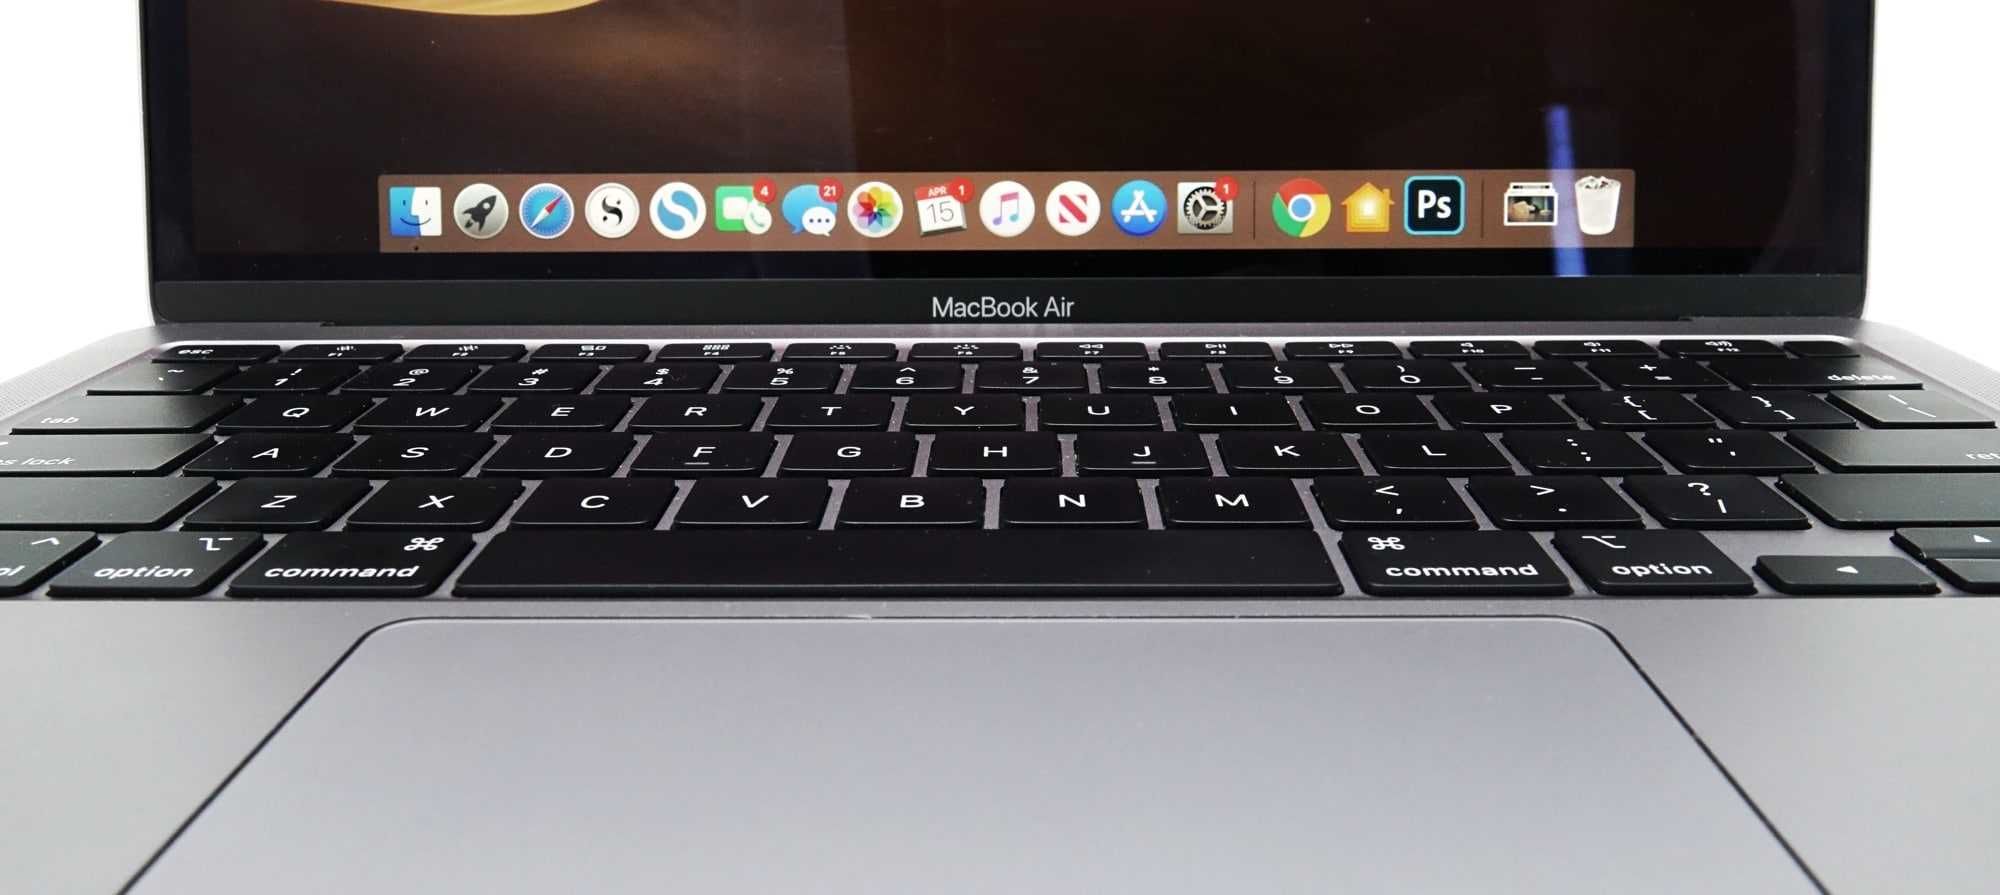 Macbook Air 2020 Space Gray 8/256 gb ssd touch id ideal!